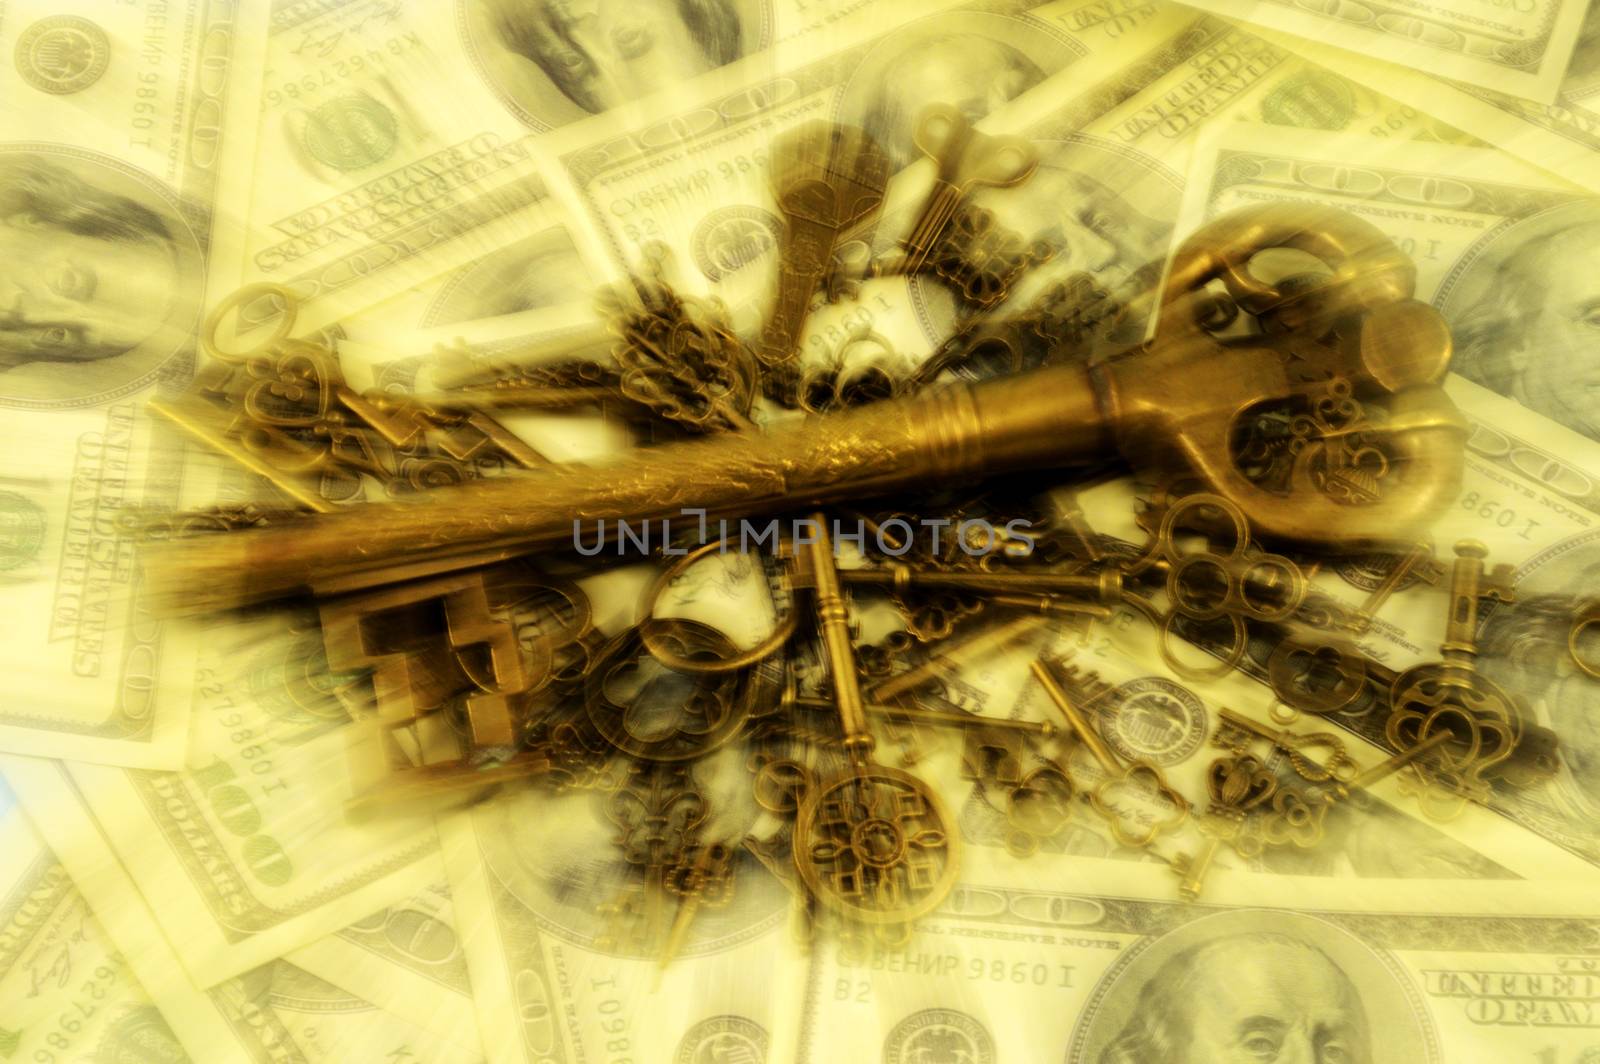 A lens blurred pile of brass keys with a larger dominant one centered on a background of American hundred dollar bills for creating a wealth strategy concept.